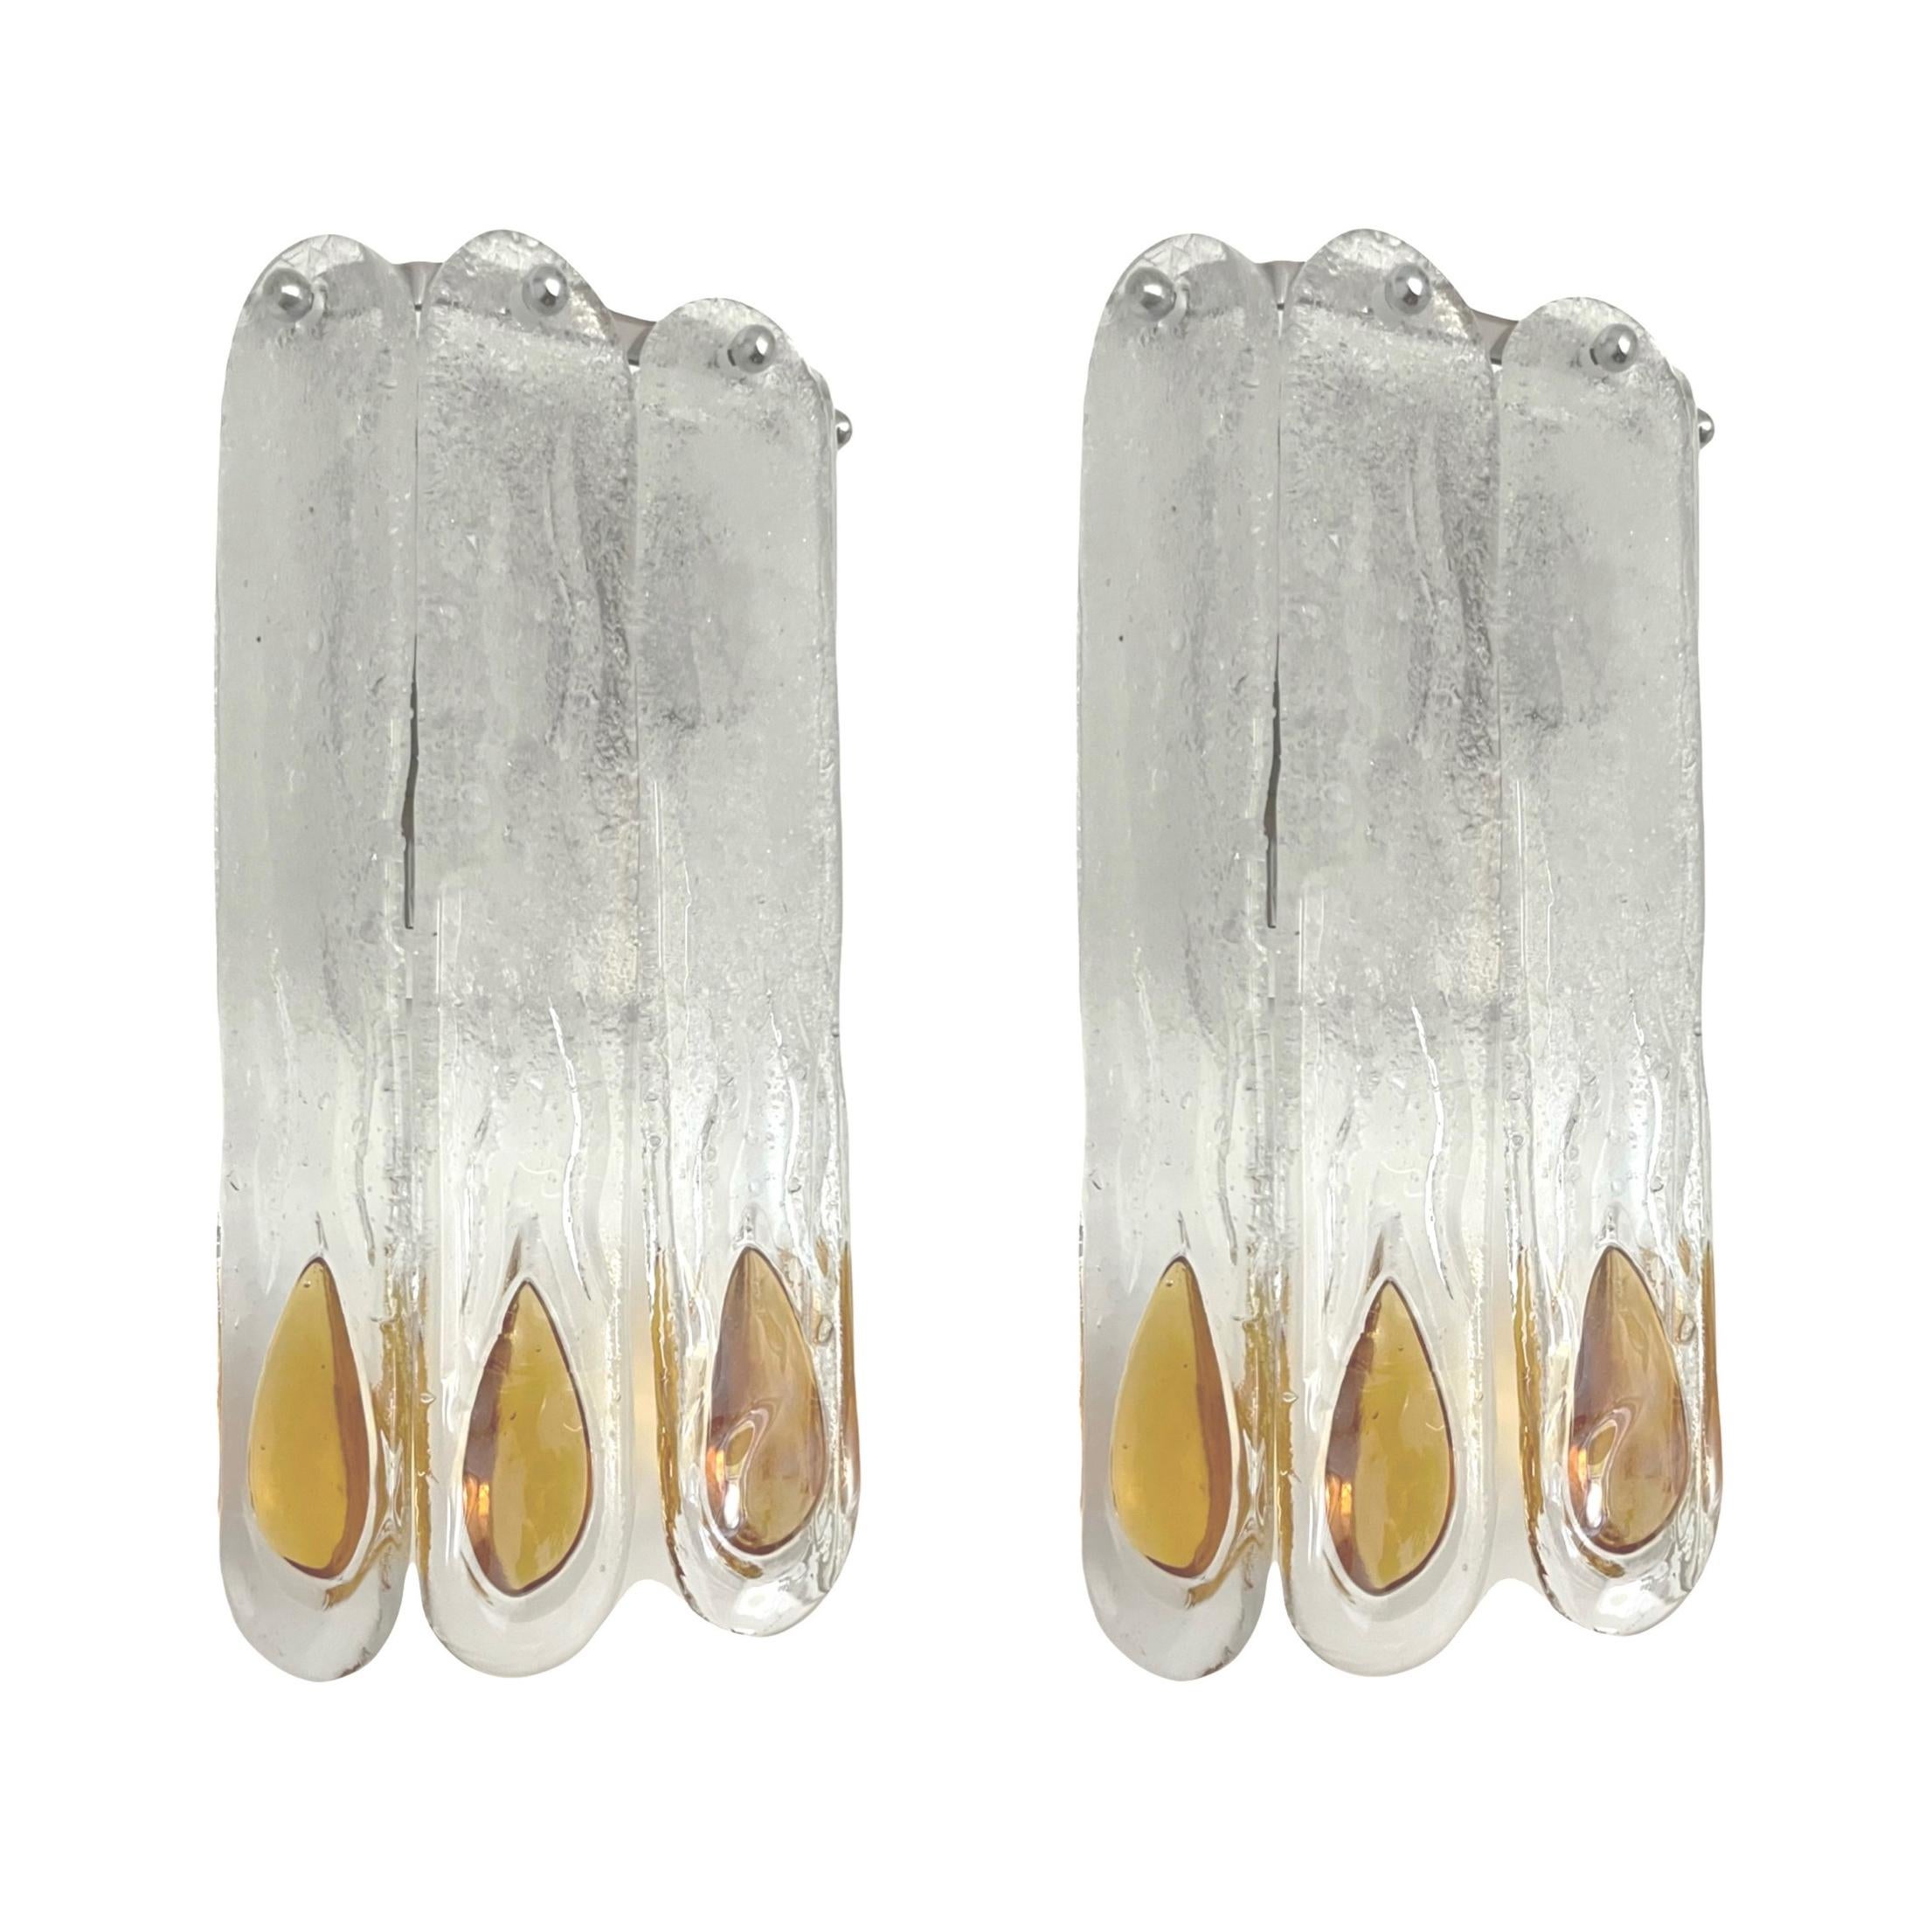 Stunning and beauty Set of Three Italian Amber Clear Murano glass Wall Sconces. These fixtures were designed and manufactured during the 1970s in Italy by Mazzega.
Mazzega lie in the noble Venetian glassworking tradition; the firm was founded Angelo